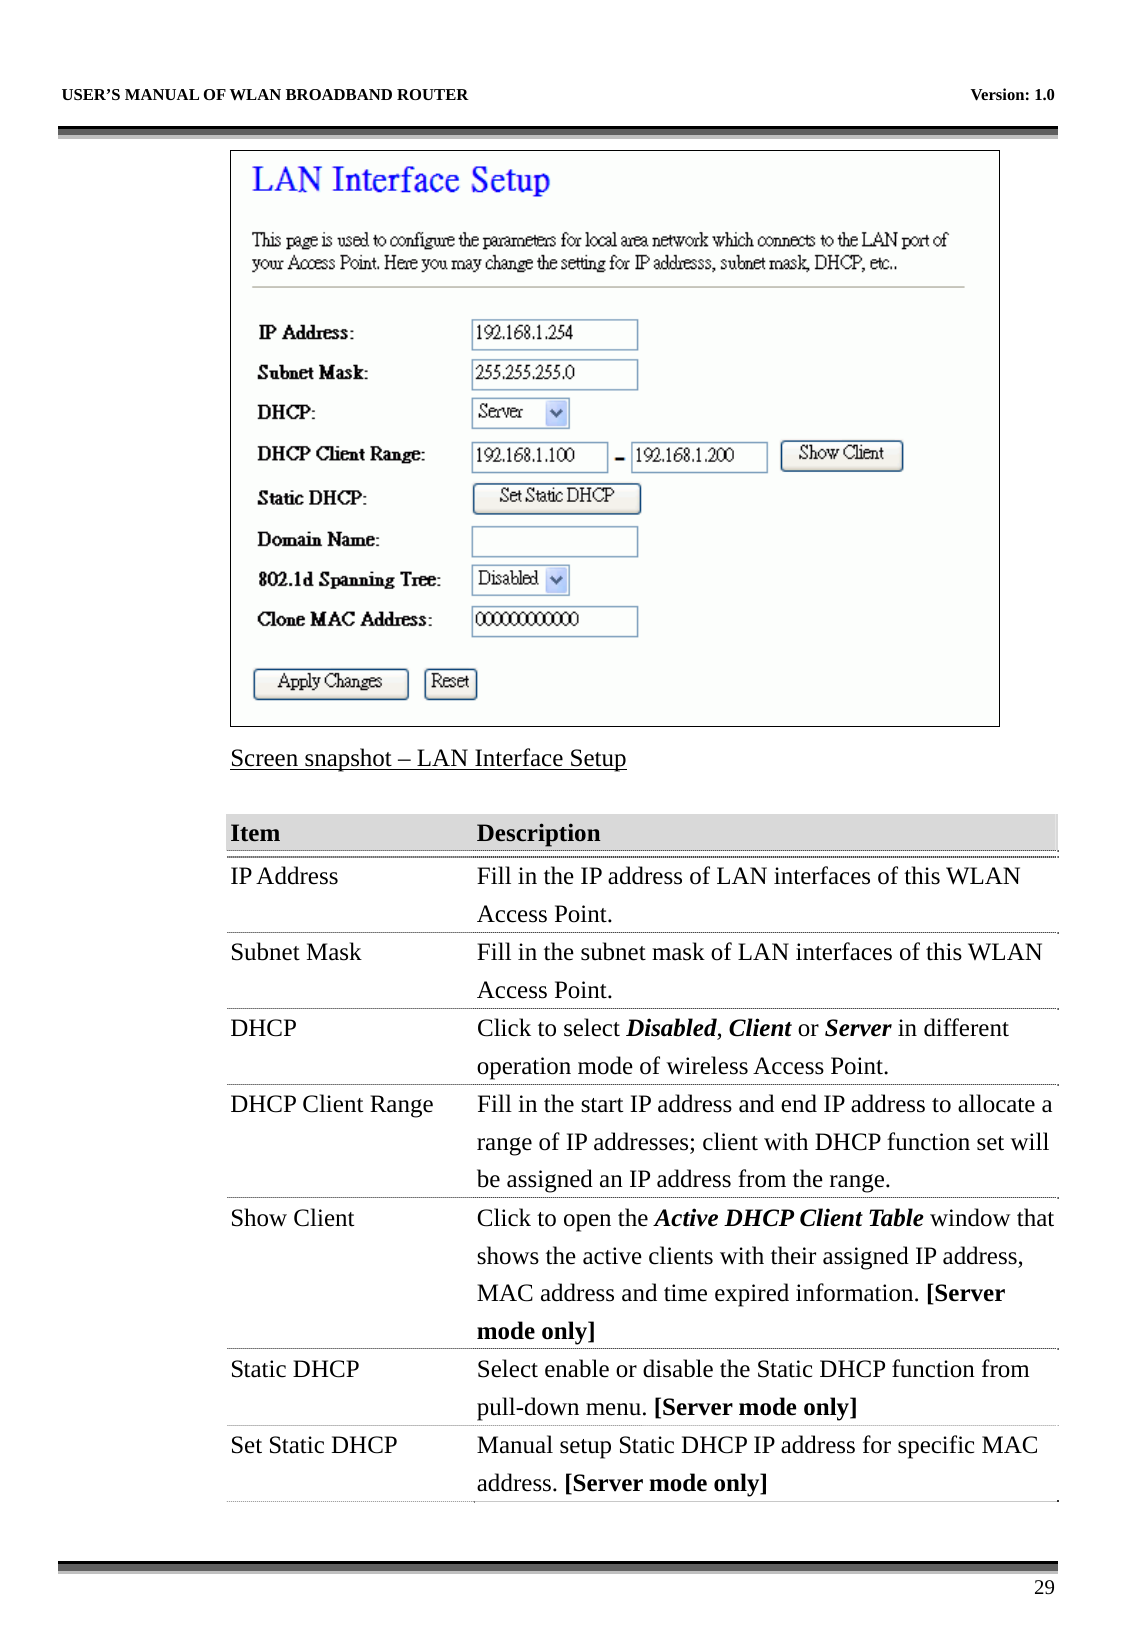   USER’S MANUAL OF WLAN BROADBAND ROUTER    Version: 1.0      29  Screen snapshot – LAN Interface Setup  Item  Description   IP Address  Fill in the IP address of LAN interfaces of this WLAN Access Point. Subnet Mask  Fill in the subnet mask of LAN interfaces of this WLAN Access Point. DHCP  Click to select Disabled, Client or Server in different operation mode of wireless Access Point. DHCP Client Range  Fill in the start IP address and end IP address to allocate a range of IP addresses; client with DHCP function set will be assigned an IP address from the range. Show Client  Click to open the Active DHCP Client Table window that shows the active clients with their assigned IP address, MAC address and time expired information. [Server mode only] Static DHCP Select enable or disable the Static DHCP function from pull-down menu. [Server mode only] Set Static DHCP Manual setup Static DHCP IP address for specific MAC address. [Server mode only] 